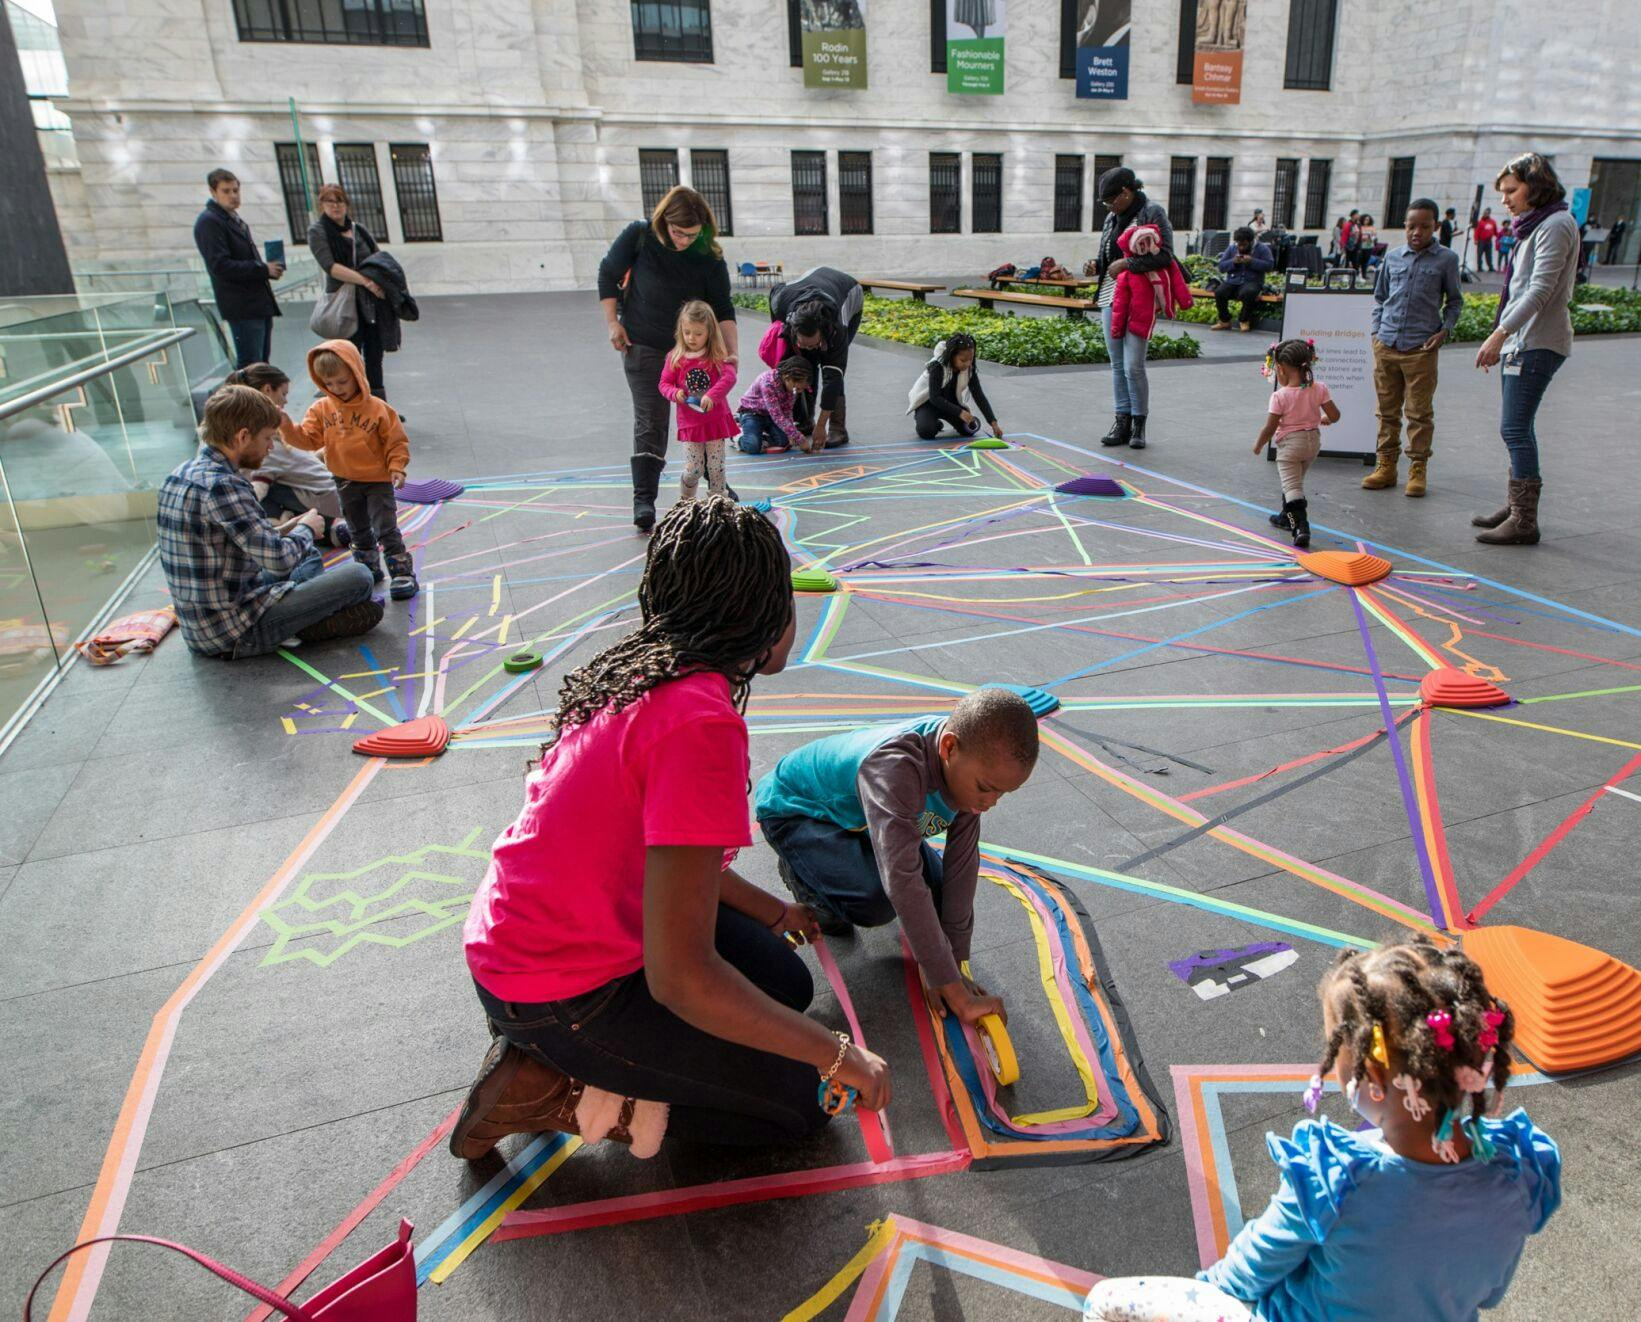 children participating in an activity using tape on the ground